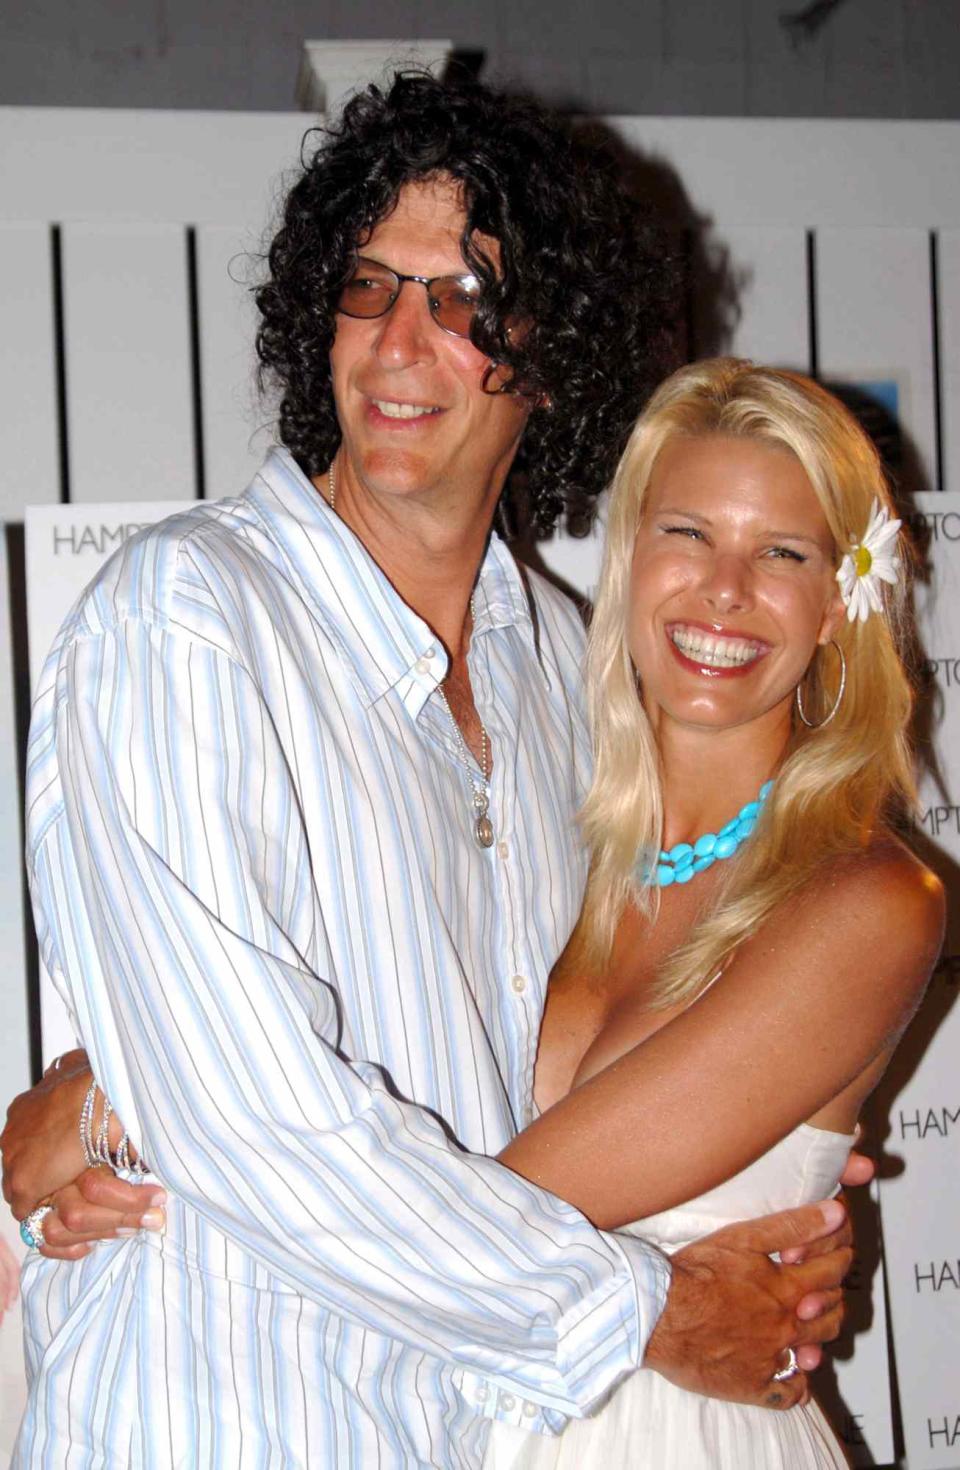 Howard Stern and Beth Ostrosky during Hamptons Magazine July Issue Launch Party And Birthday Celebration For July's Cover Star, Beth Ostrosky at Star Room in Wainscott, New York, United States